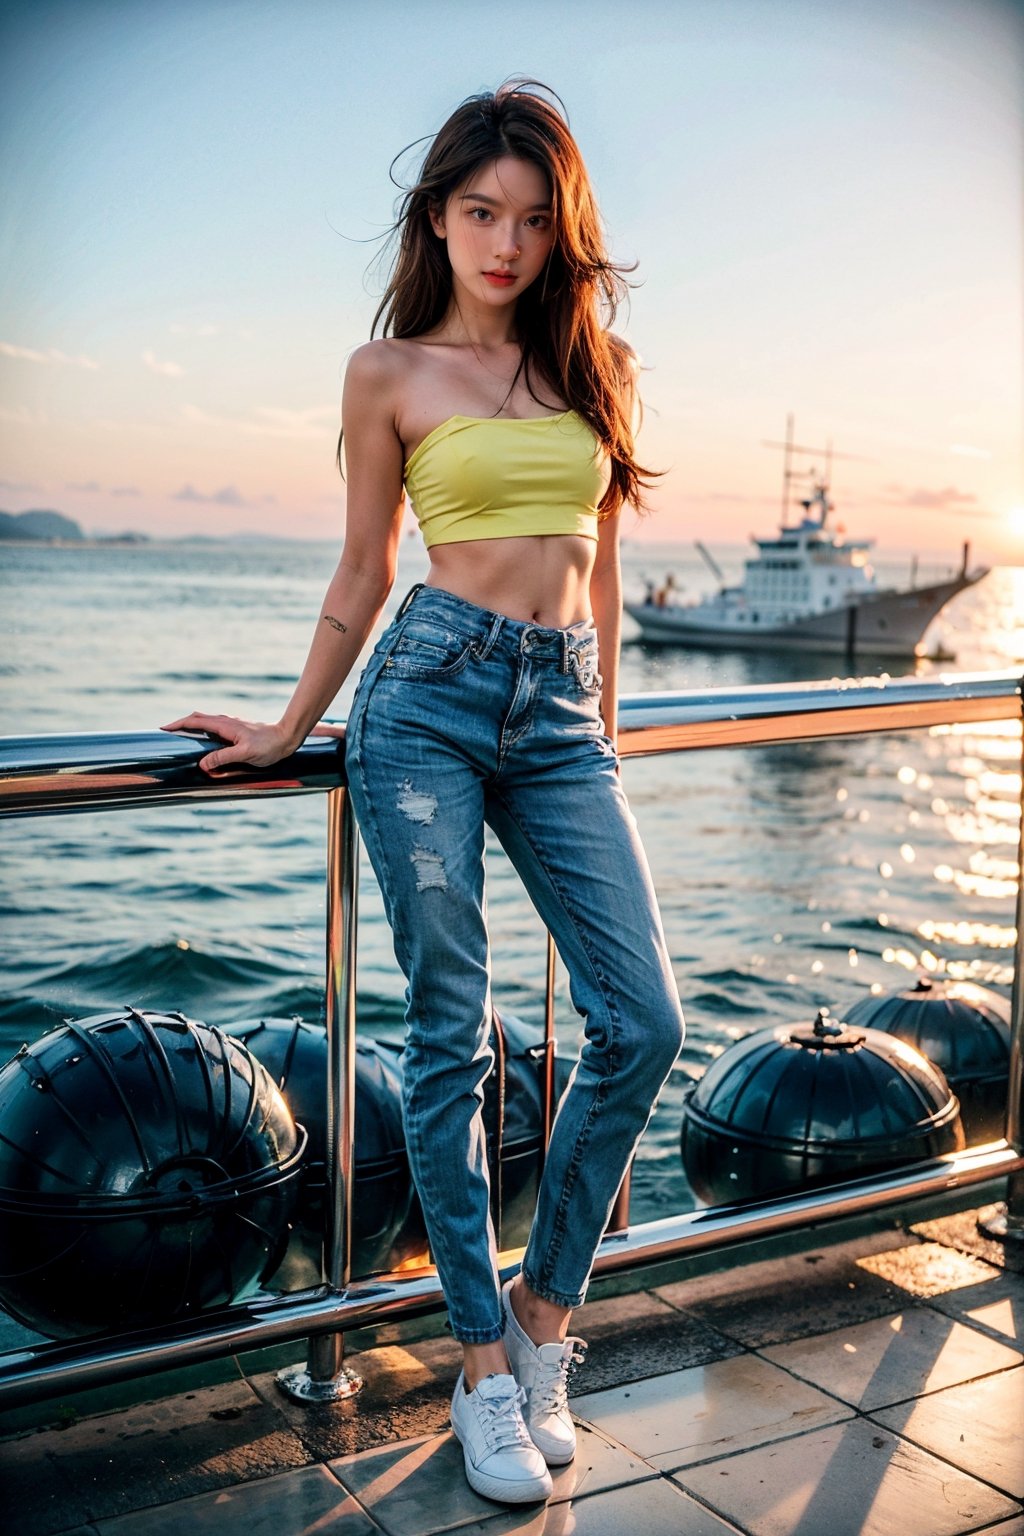 generally attractive instagram model, make it look realistic,
1girl, long hair, brown hair, standing, full body, outdoors, sky, shoes, day, ocean,railing, white shoes, holding phone, full body,
Light Yellow tube Top,Skinny Push-Up Jeans,168 cm tall,long leg,thin leg,

